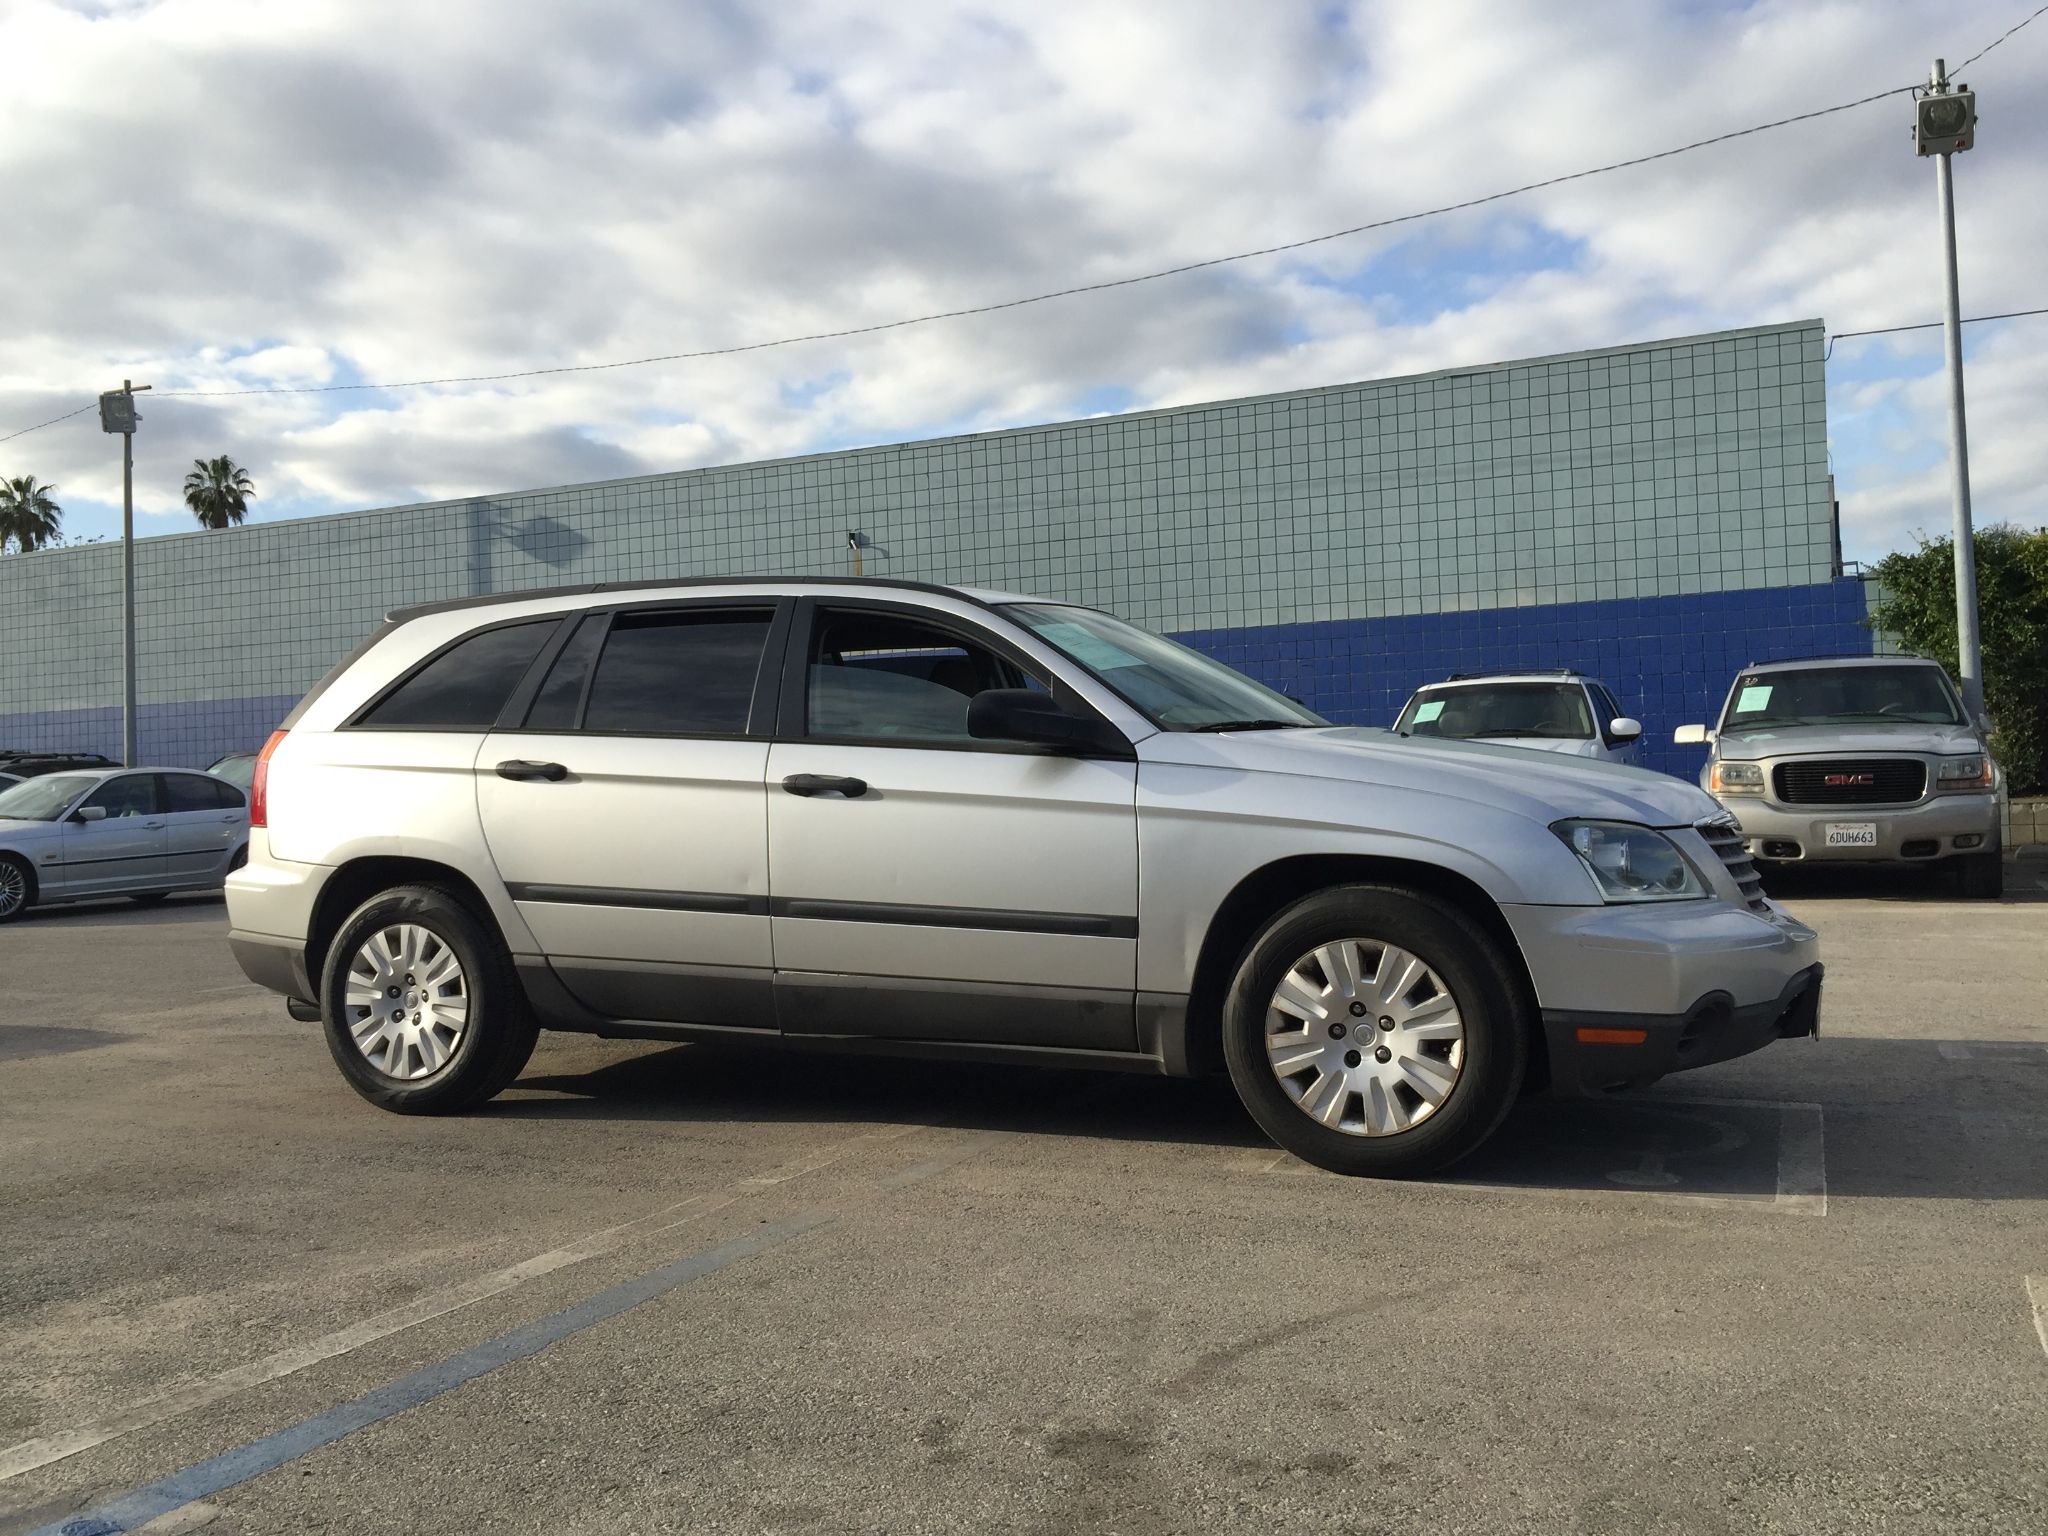 Used 2005 Chrysler Pacifica at City Cars Warehouse INC